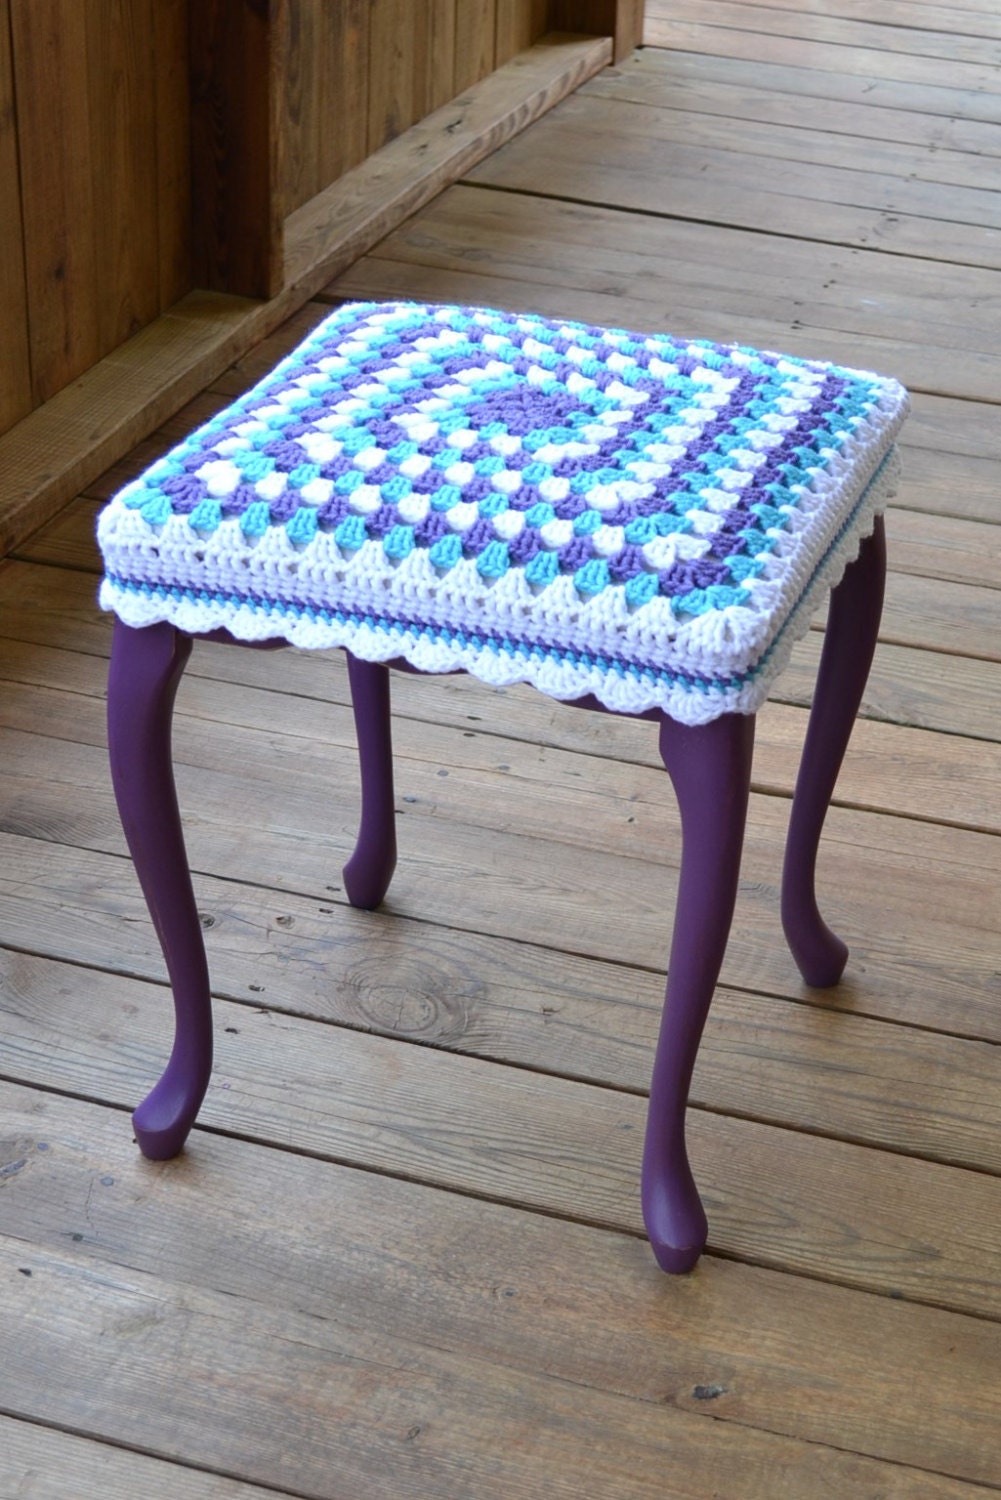 Stool 17"  high with Granny Square Crochet Cover Purple Upcycle Recycle littlestsister - LittlestSister